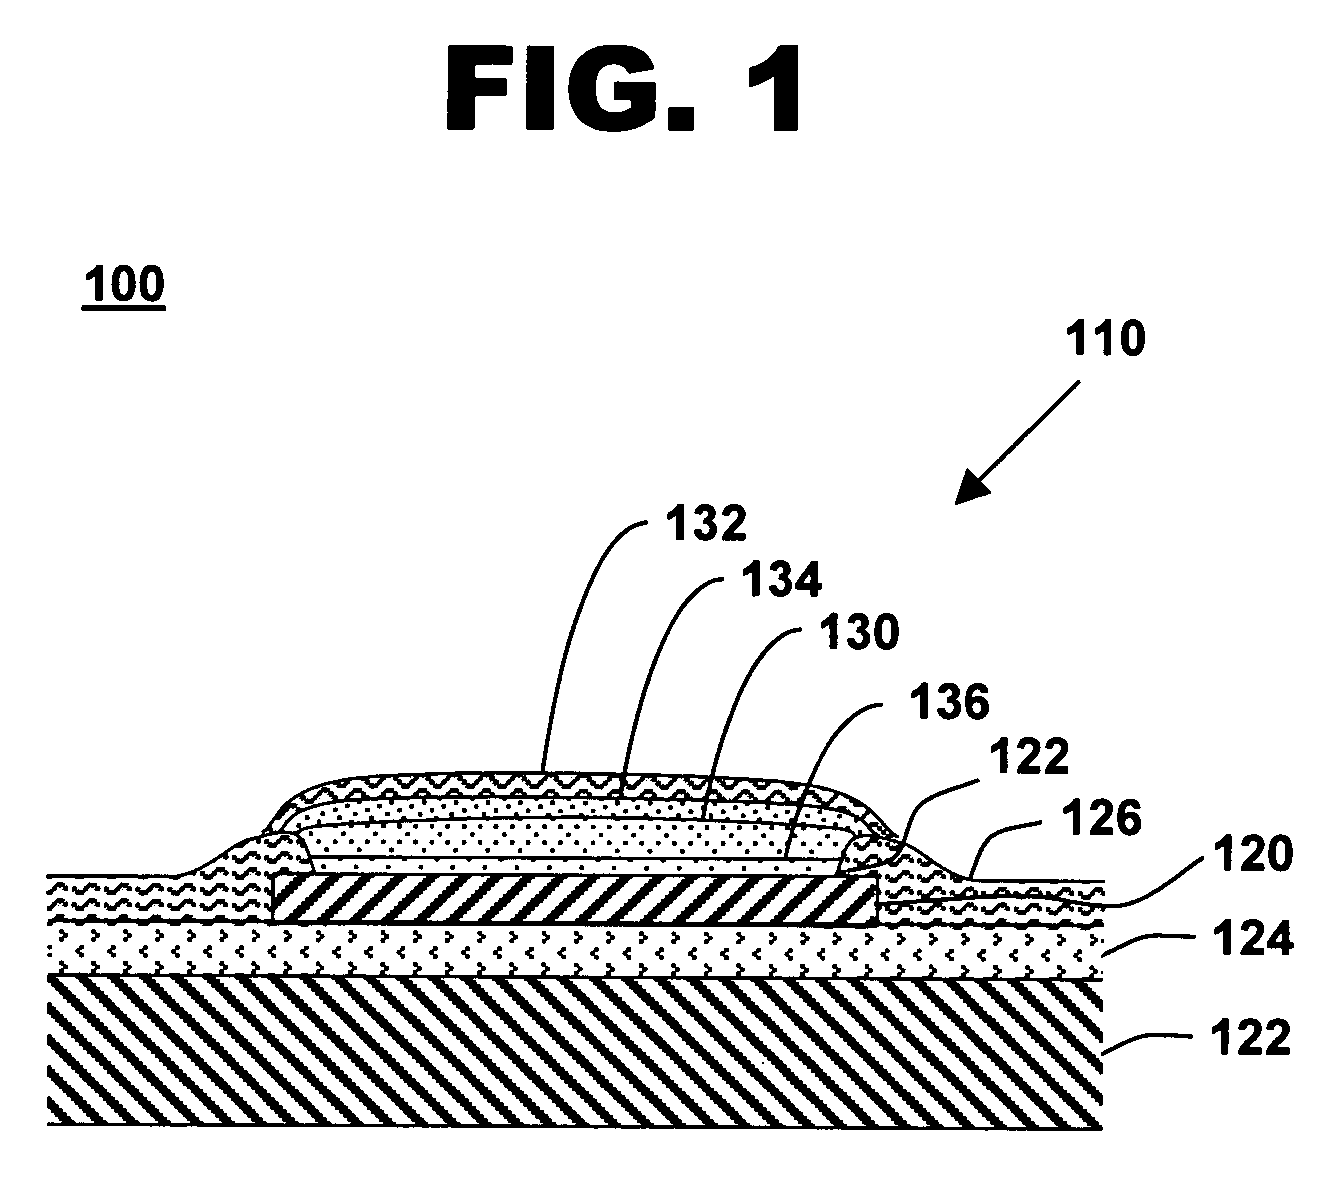 Activation plate for electroless and immersion plating of integrated circuits